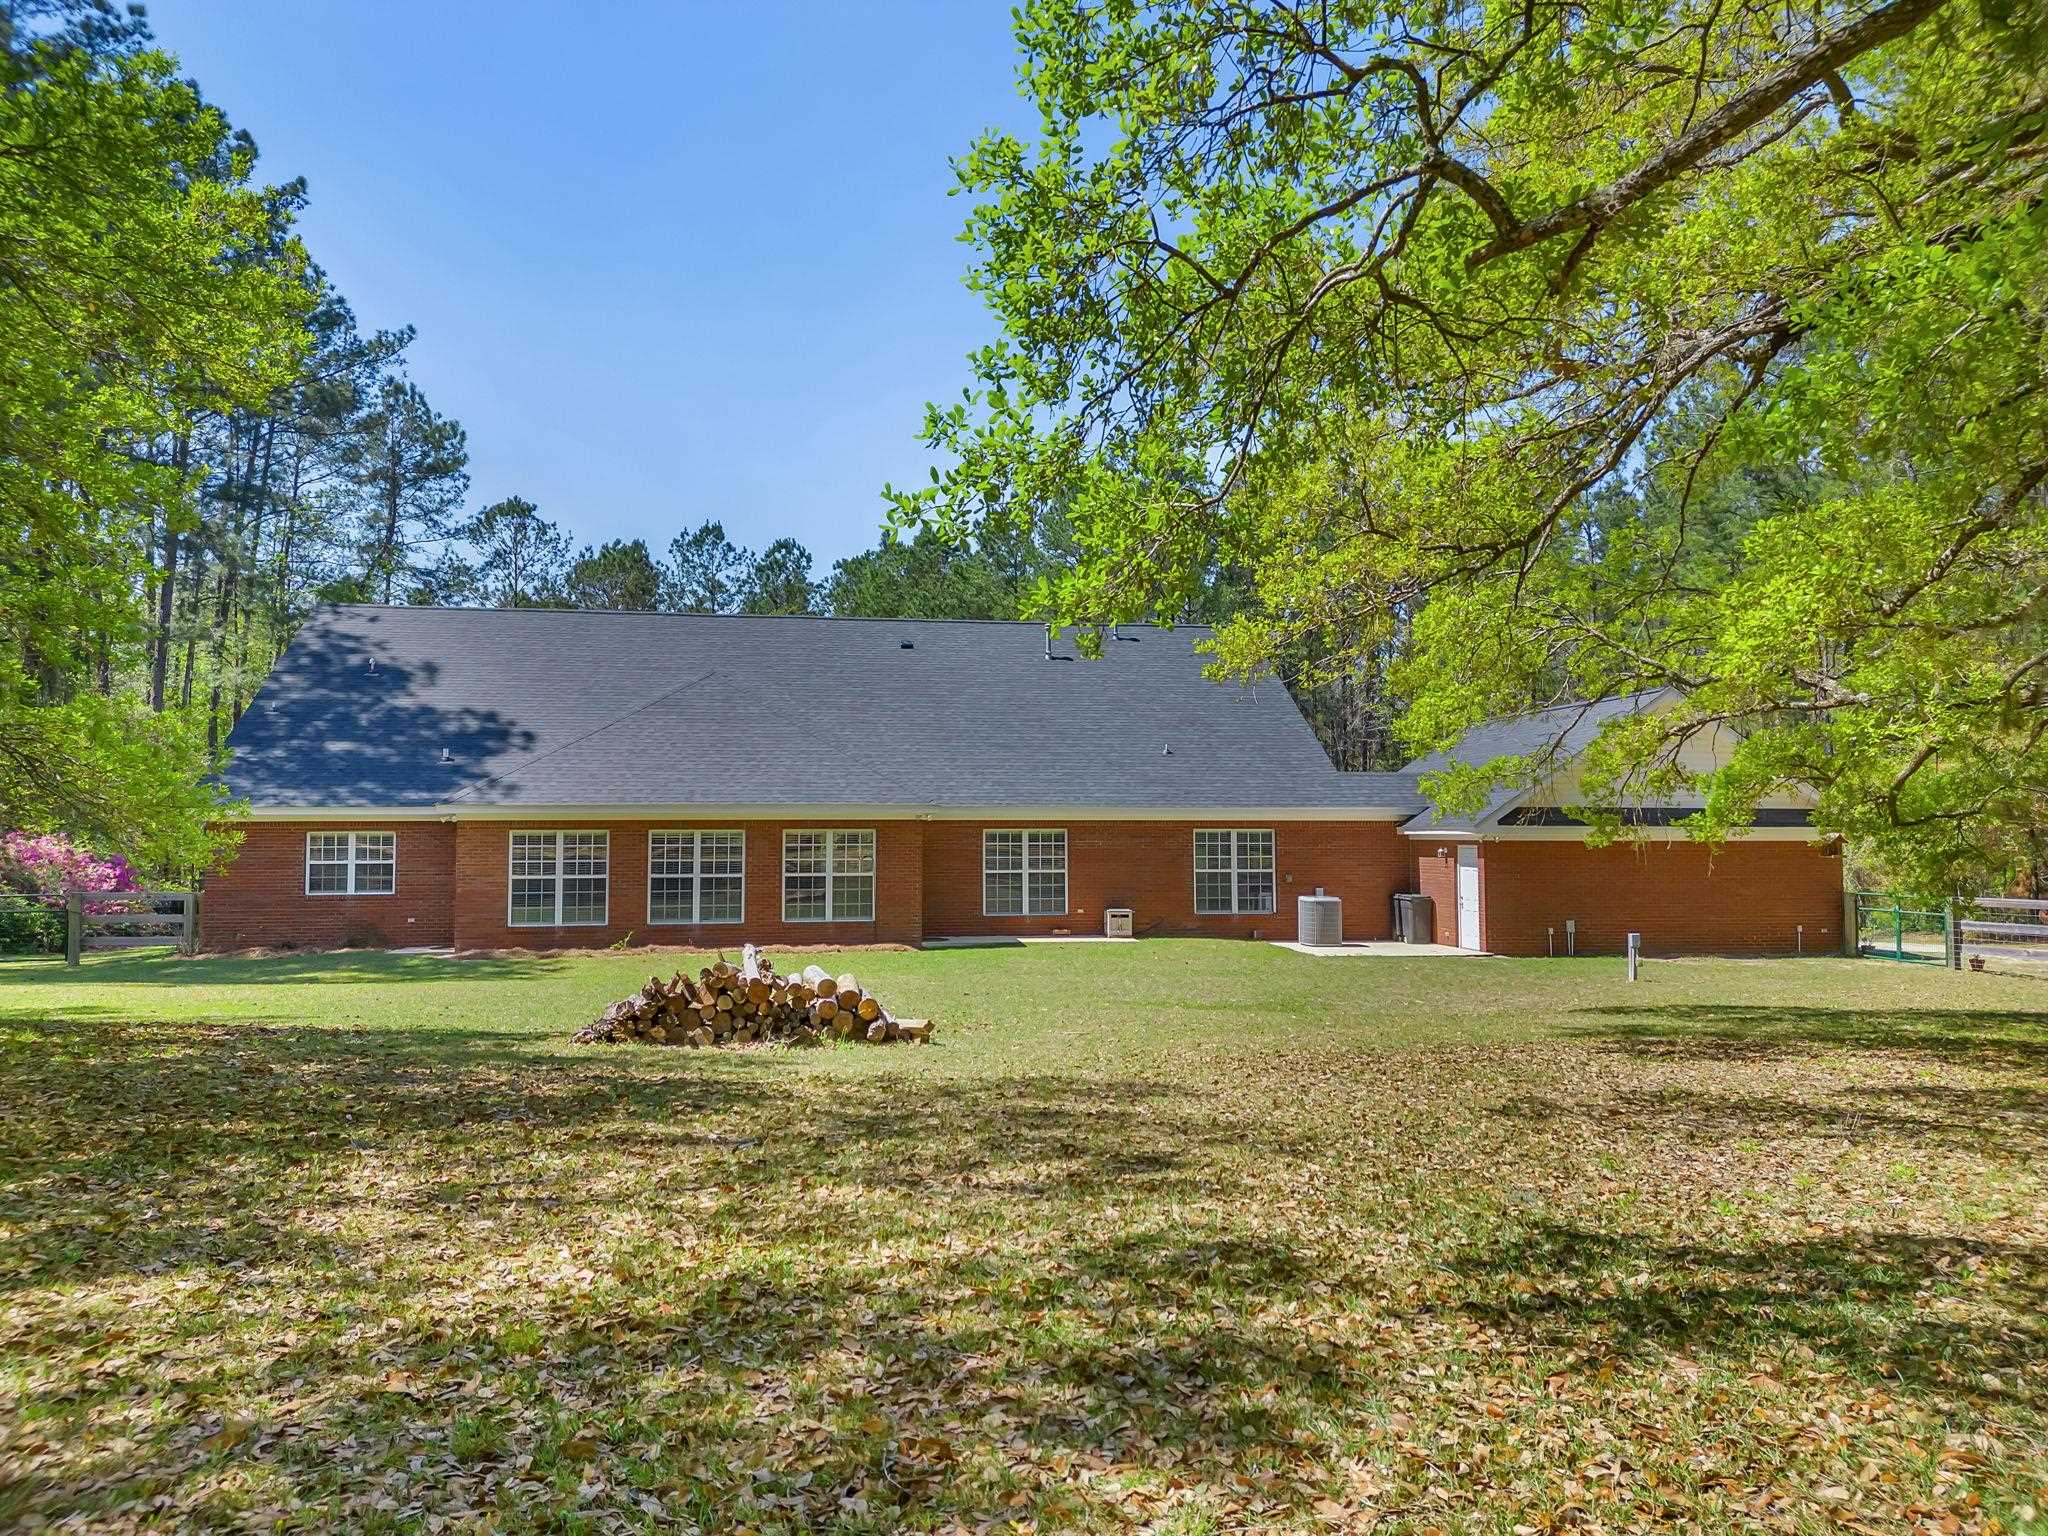 11876 Midnight Trail,TALLAHASSEE,Florida 32317,5 Bedrooms Bedrooms,3 BathroomsBathrooms,Detached single family,11876 Midnight Trail,370012